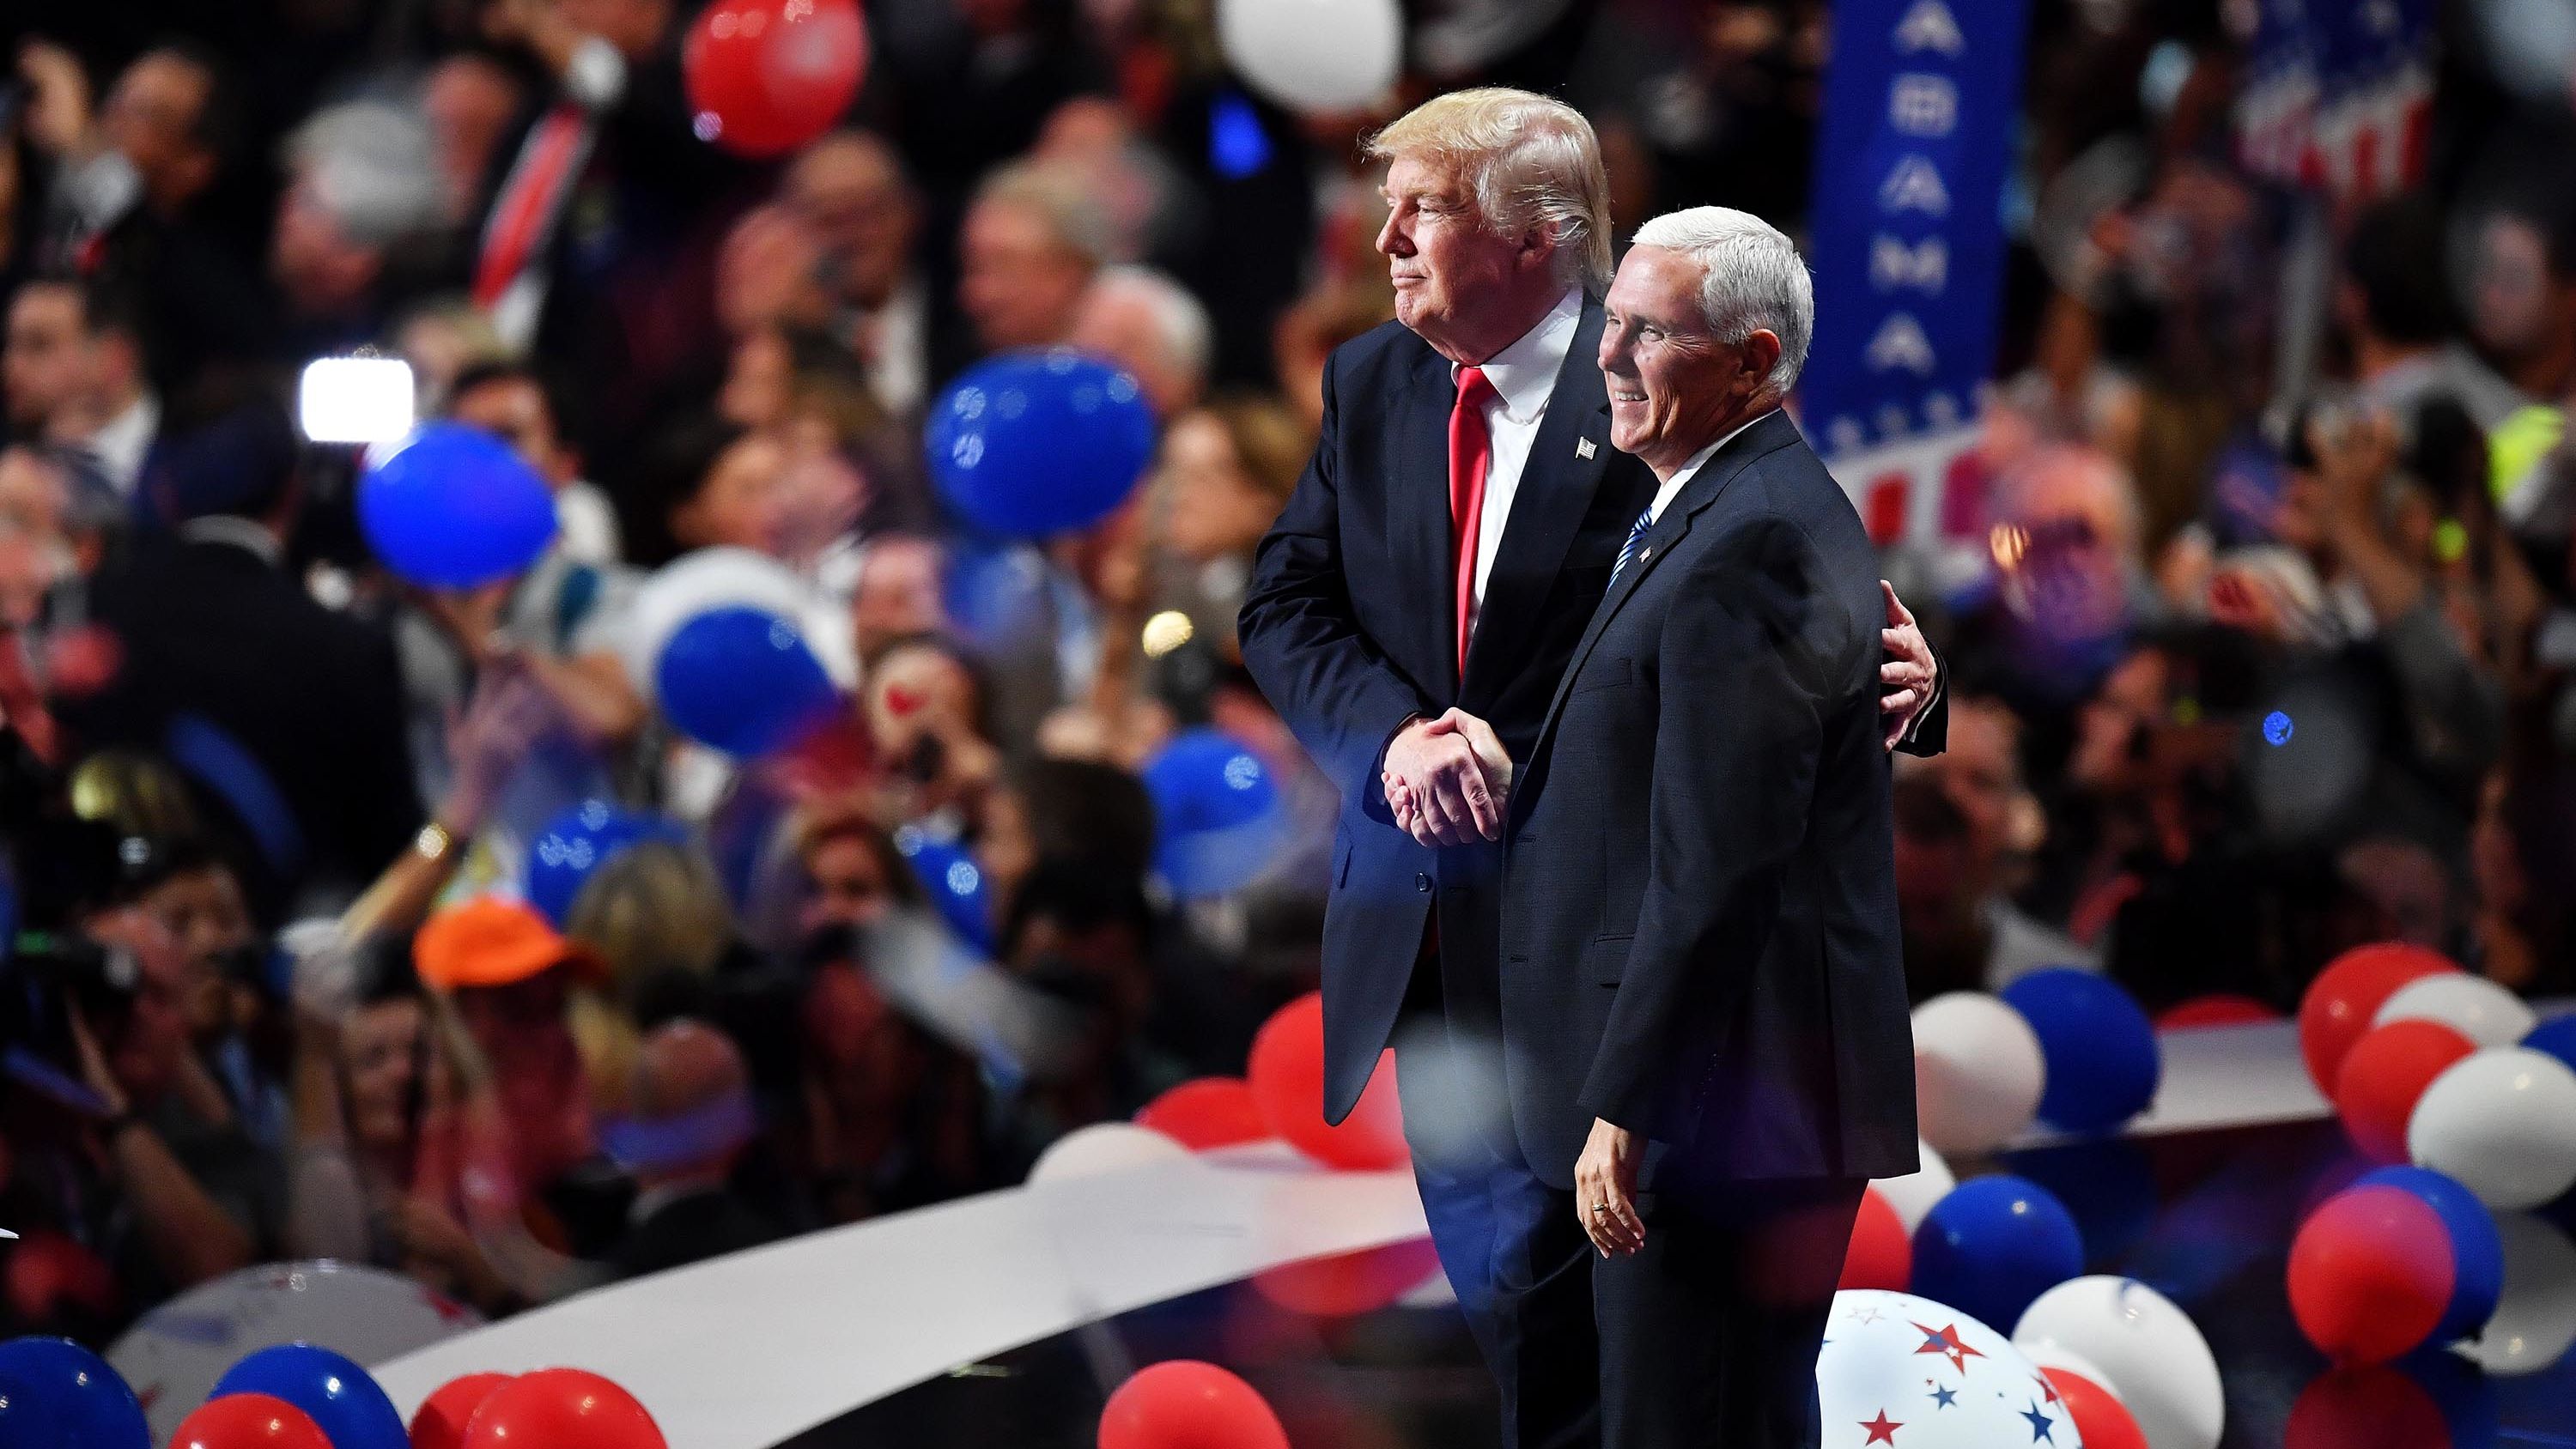 Trump and Pence acknowledge the crowd at the end of the Republican National Convention in 2016.